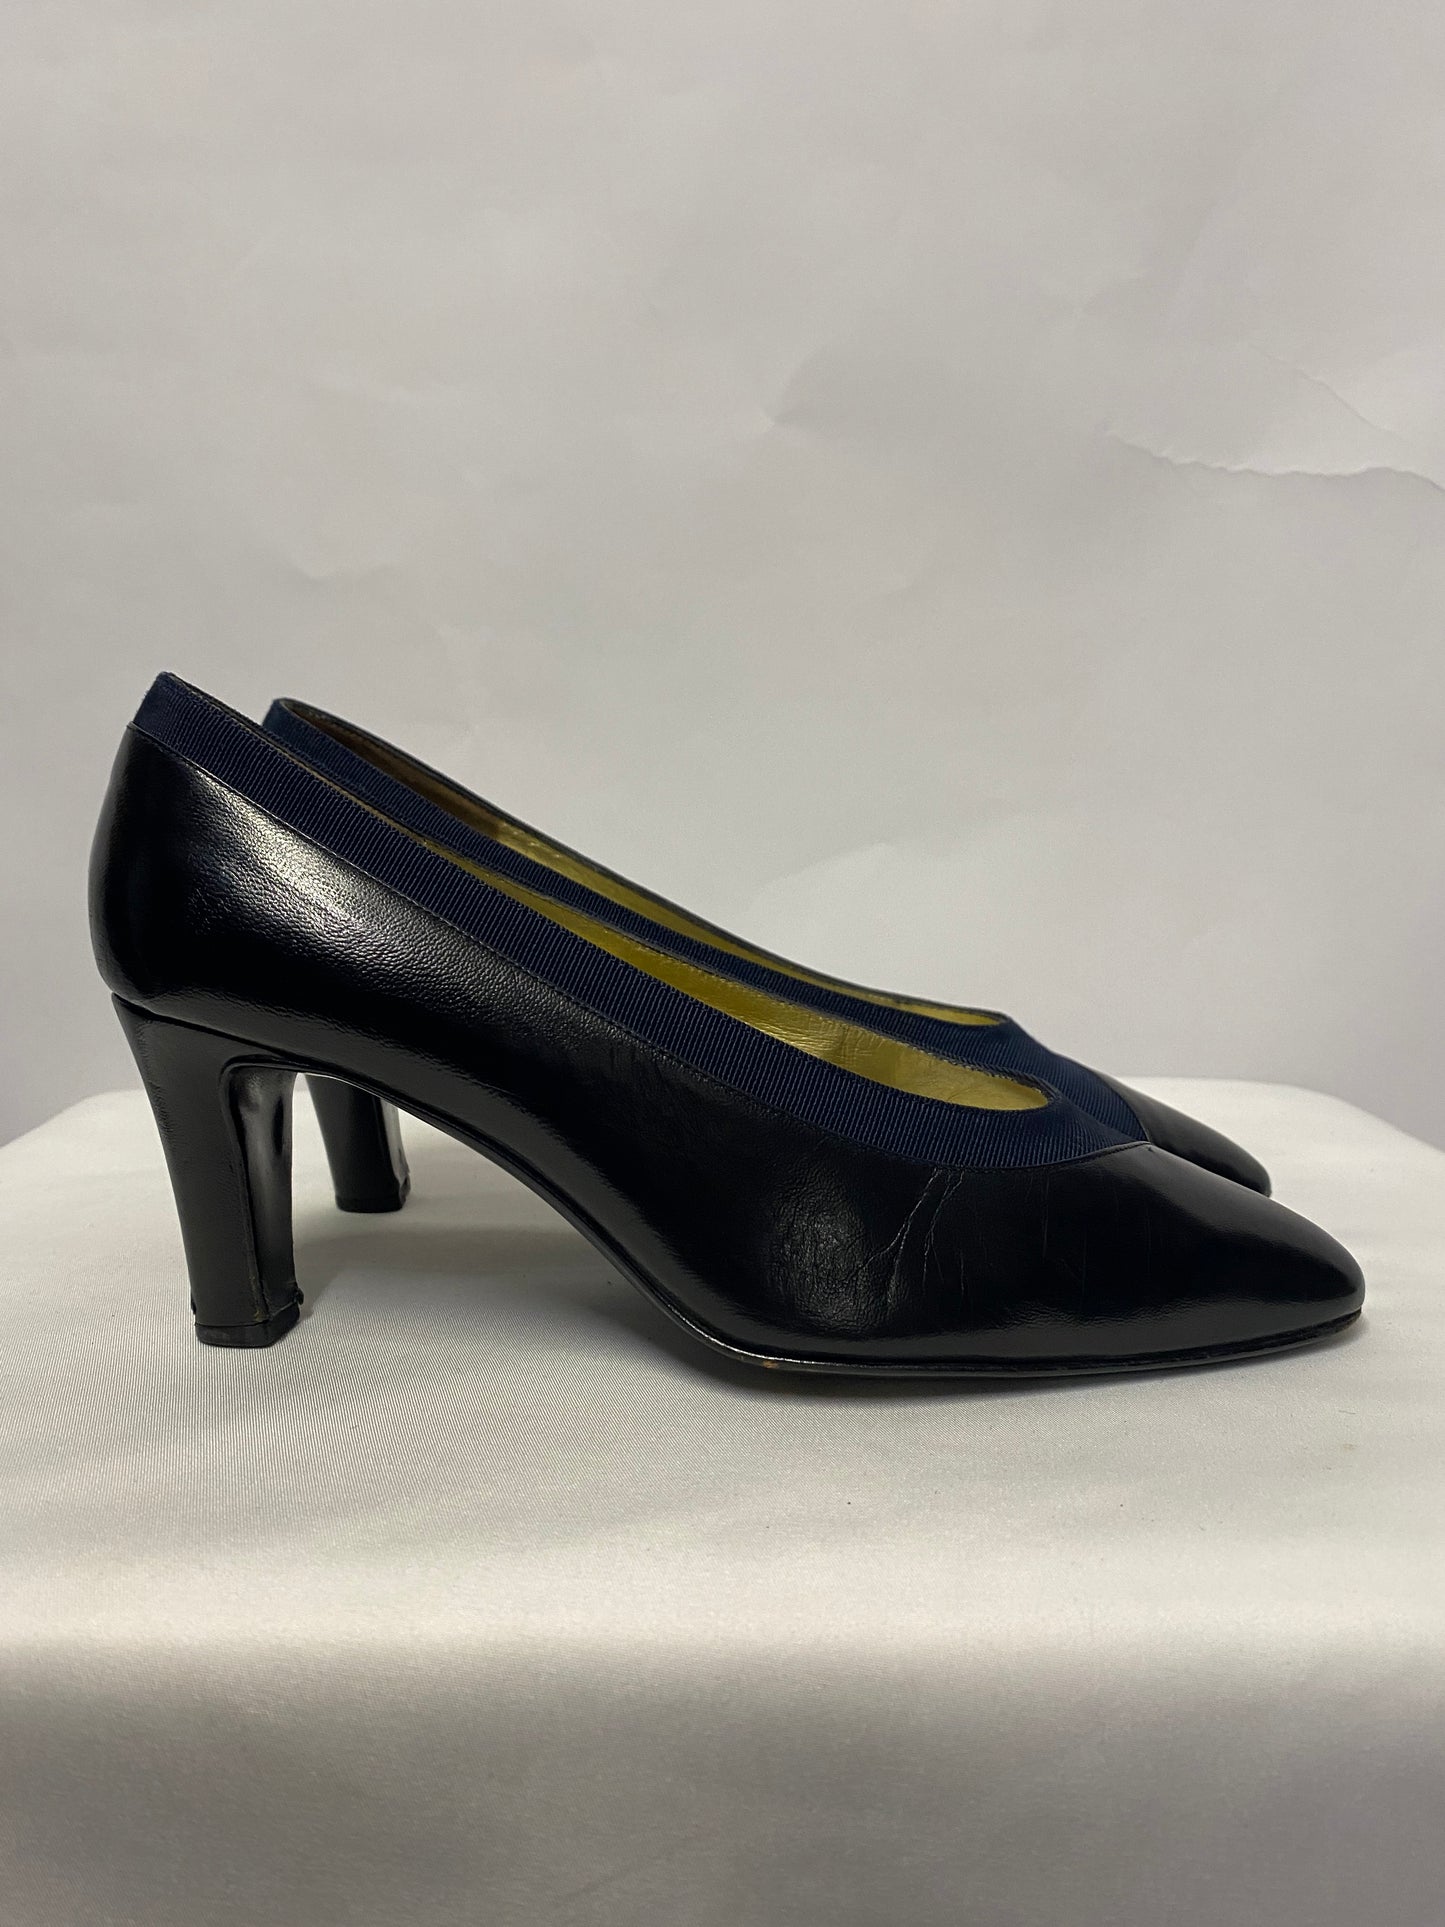 Bruno Magli Navy and Black Leather and Fabric Pumps 3.5